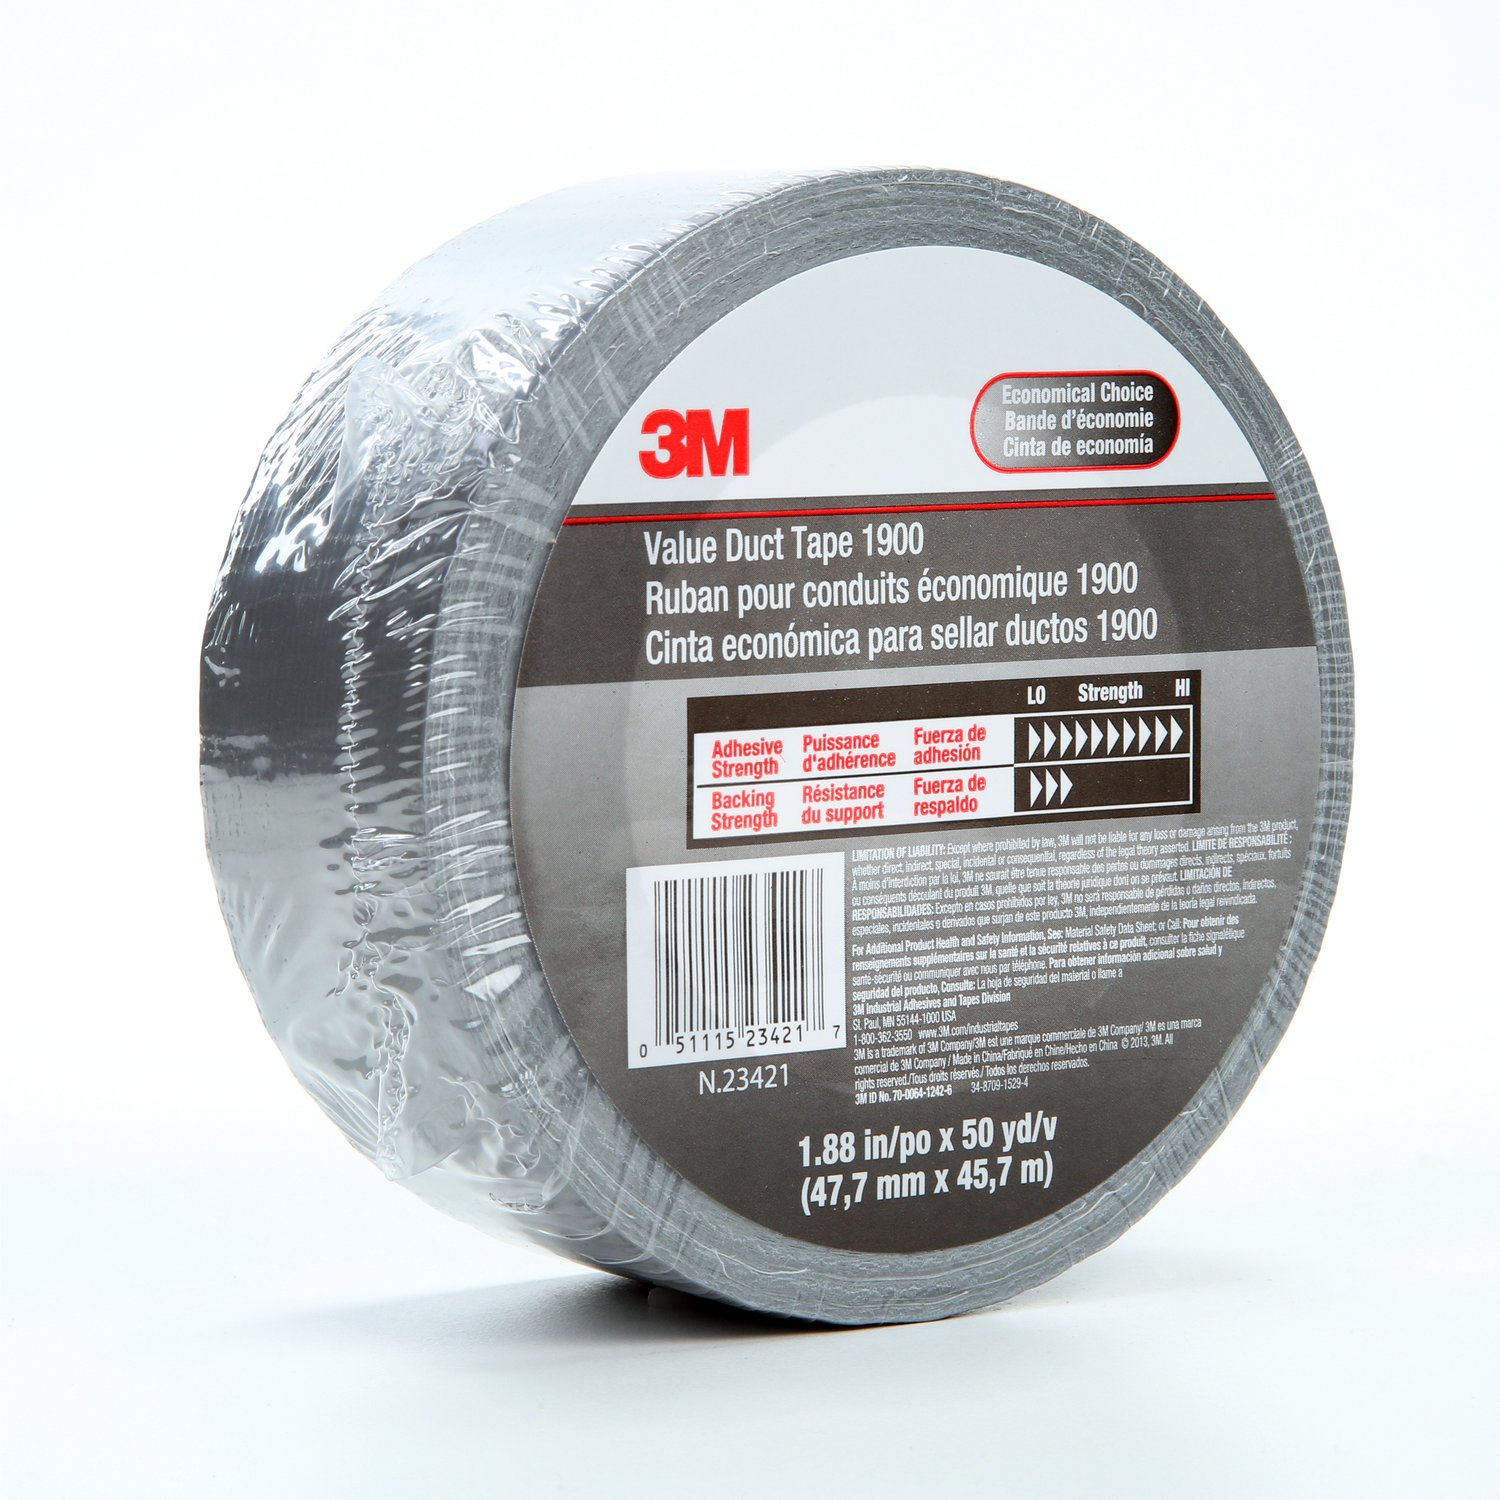 7000049202 - 3M Value Duct Tape 1900, Silver, 1.88 in x 50 yd, 5.8 mil, 24
Rolls/Case,